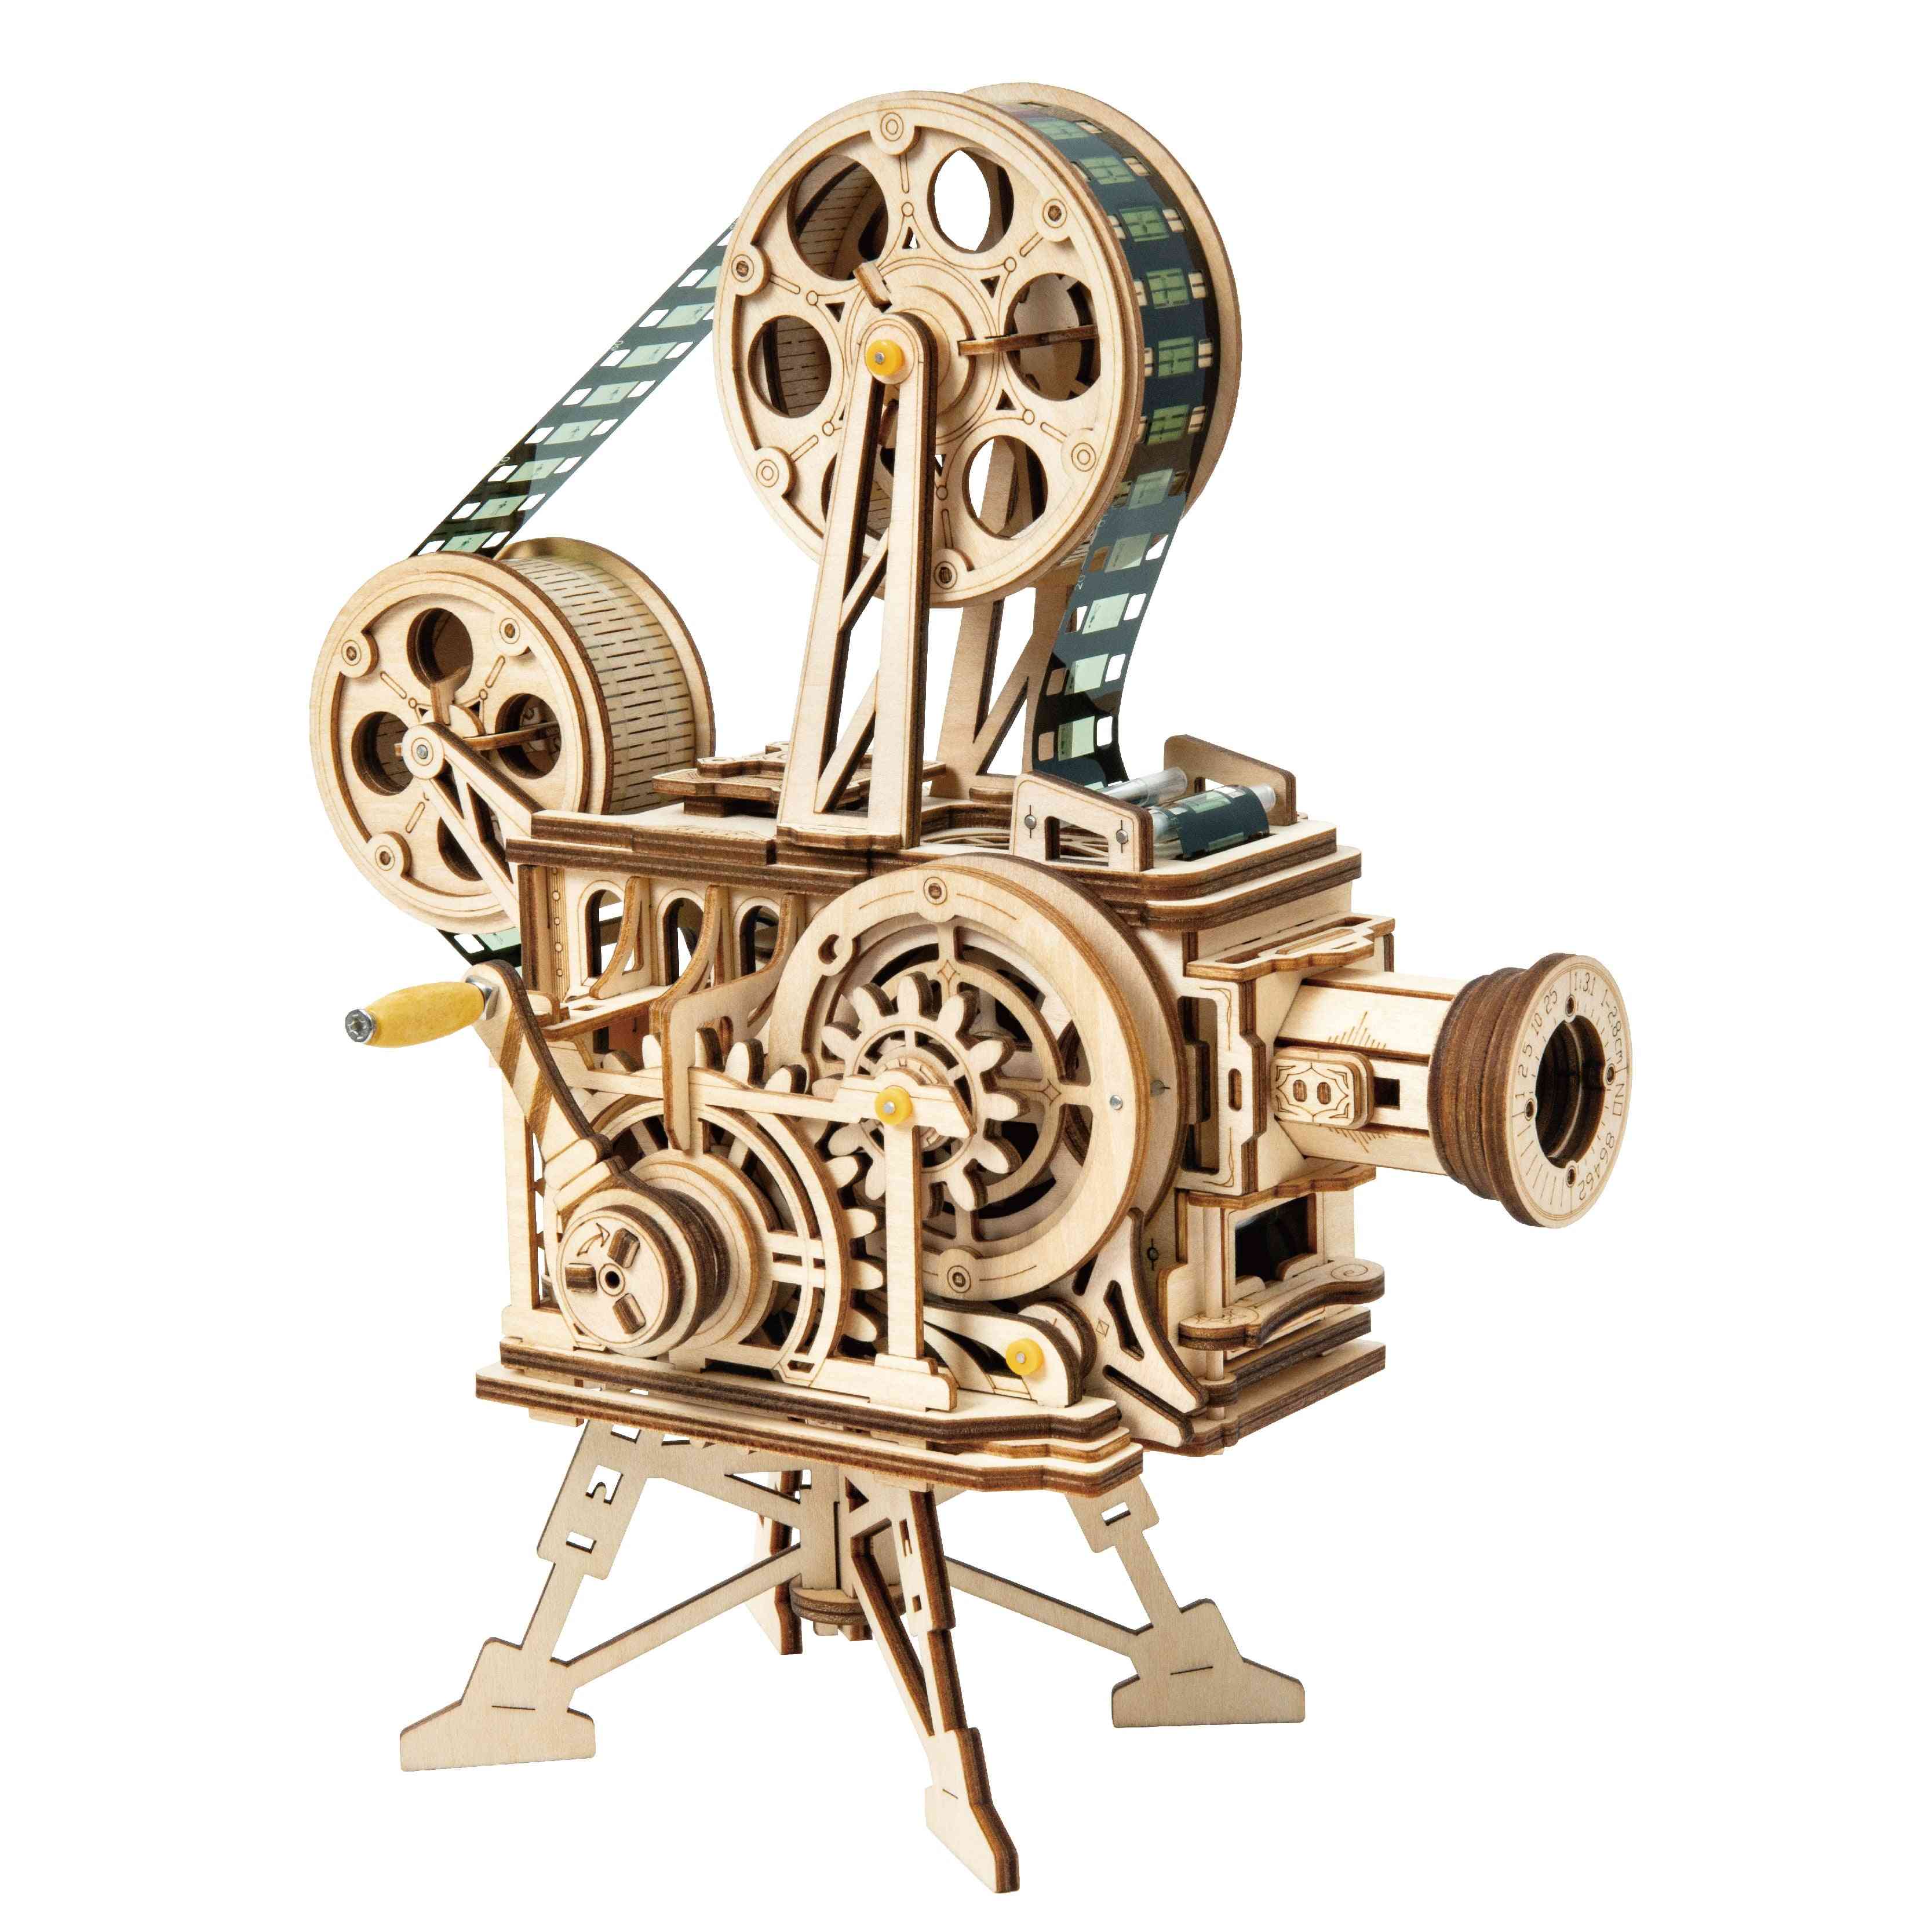 3d Wooden Mechanical Puzzle  Model Building Kits Laser Cutting Action By Clockwork For